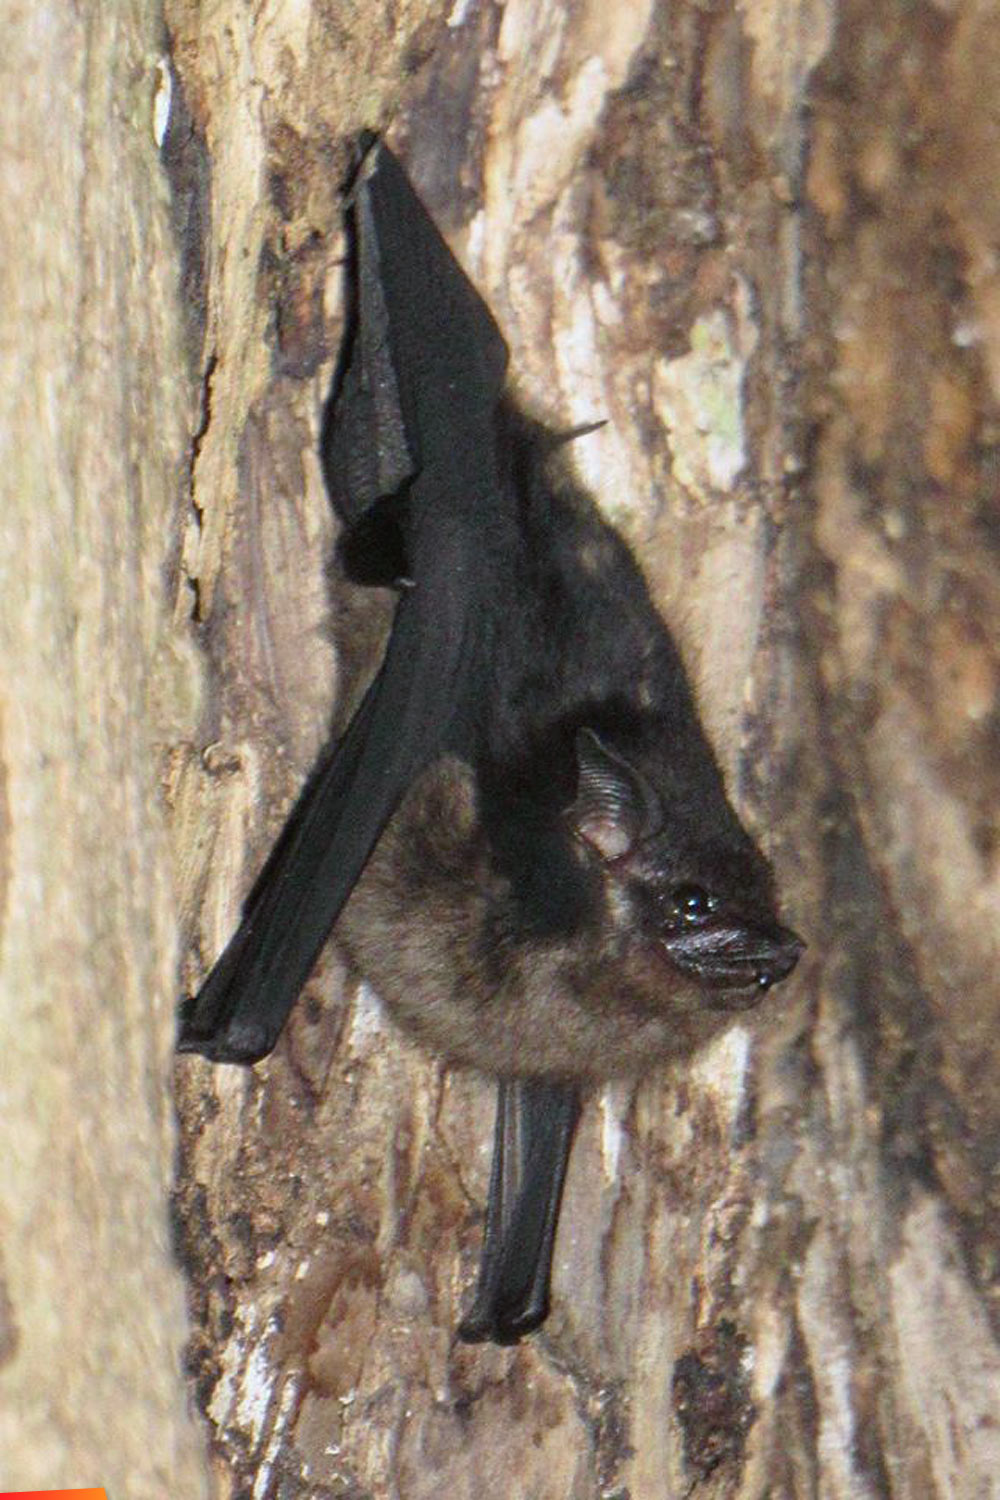 A Greater Sac-winged bat (Saccopteryx bilineata) in a hollow tree at Los Cerros